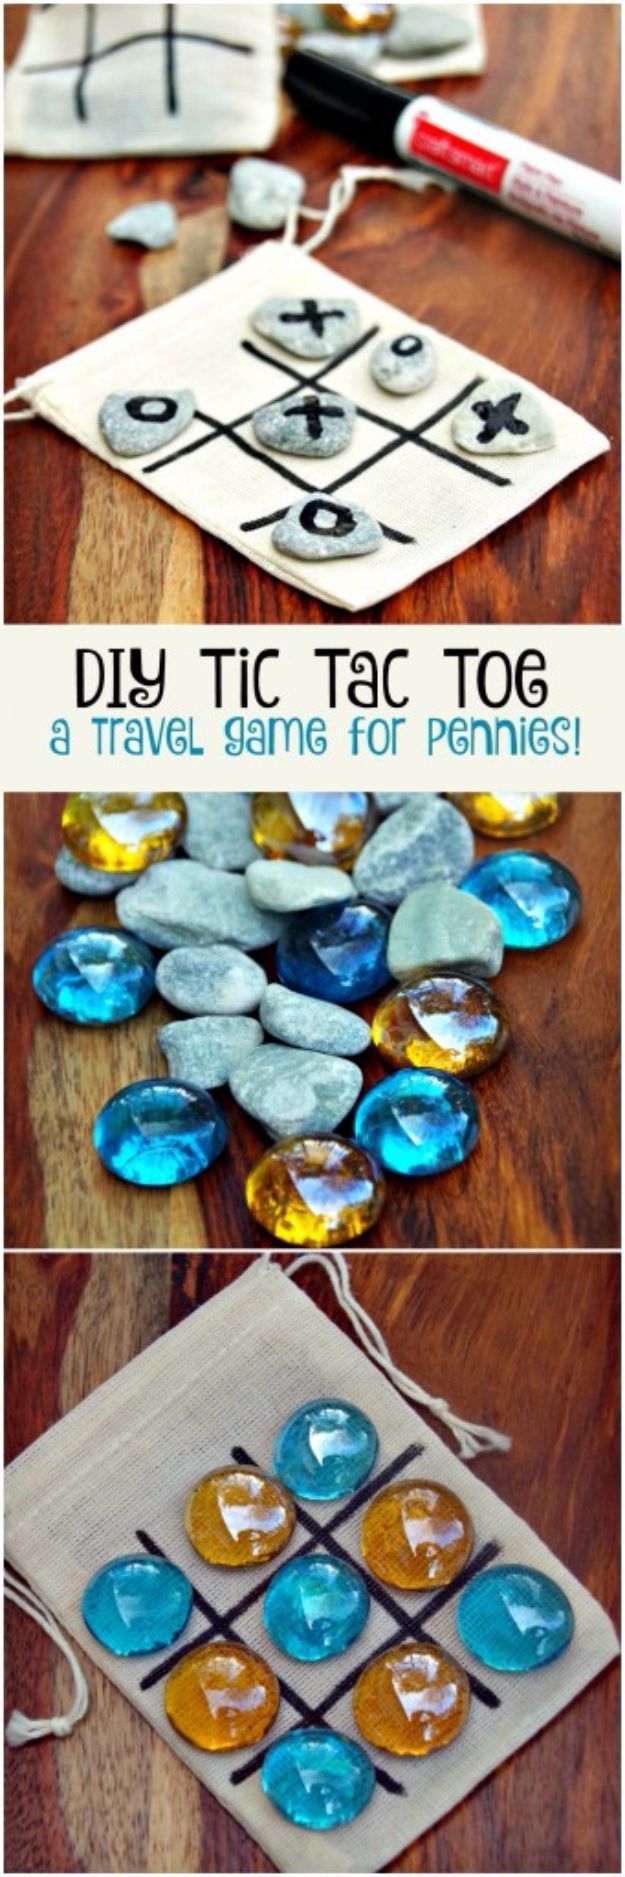 39 Easiest Dollar Store Crafts Ever – DIY Tic Tac Toe Game Board – Quick And Cheap Crafts To Make, Dollar Store Craft Ideas To